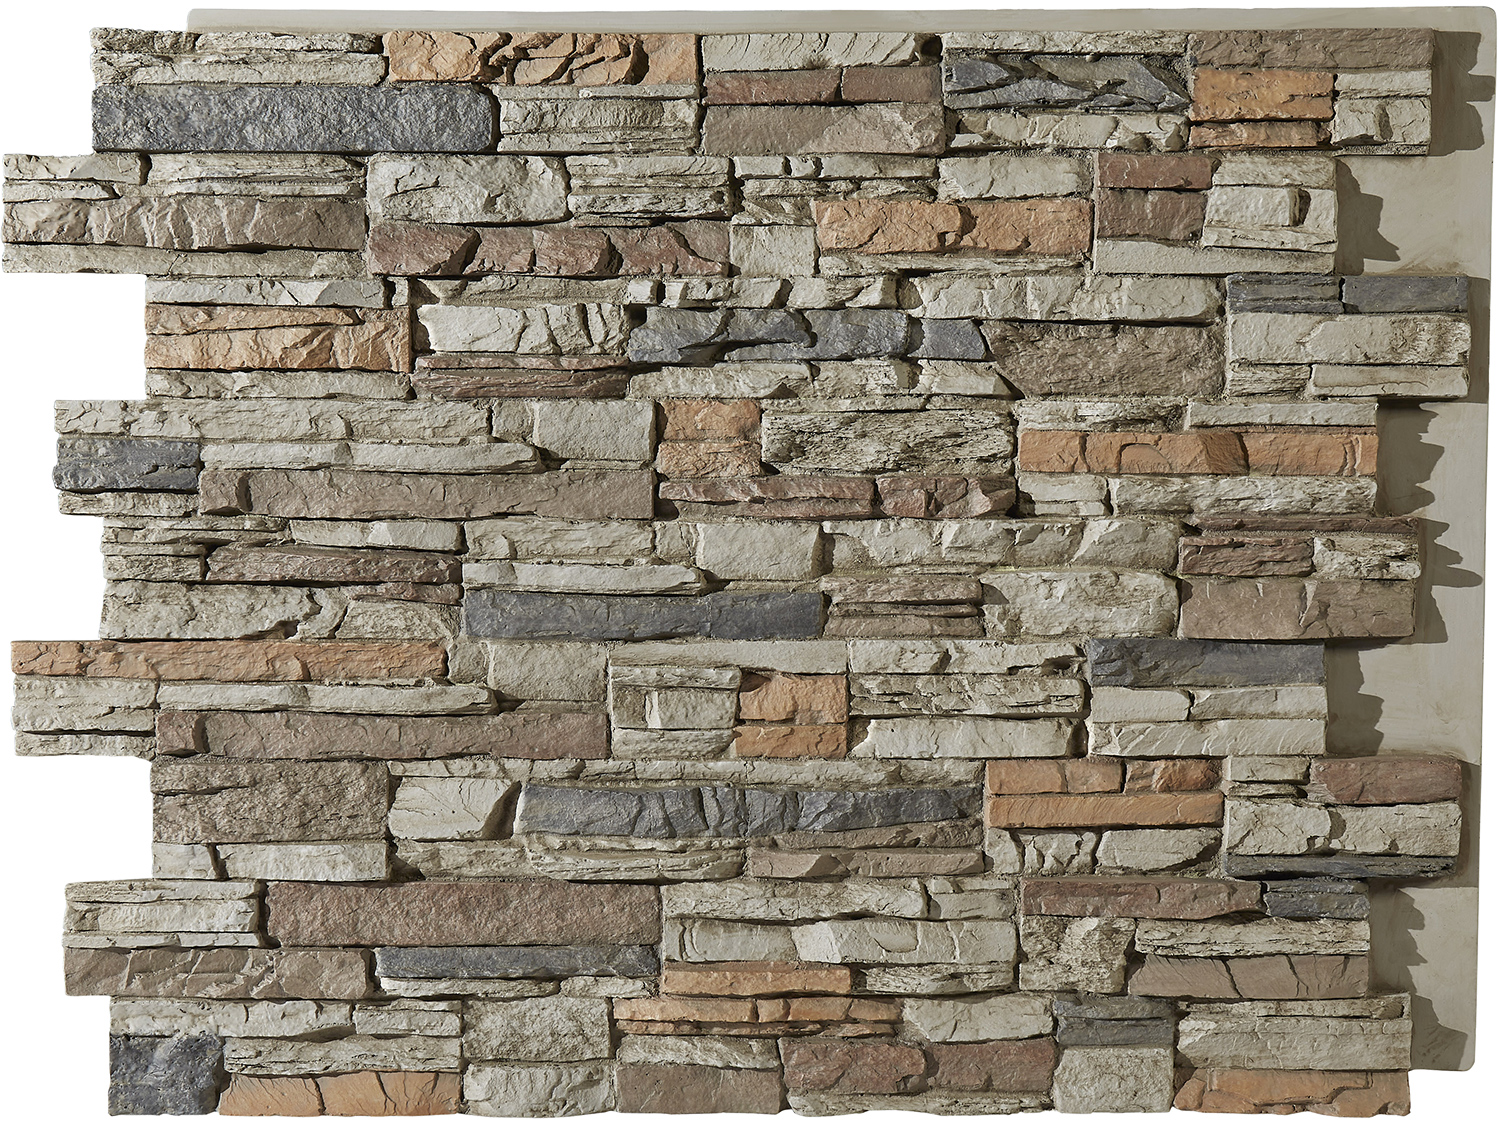 Can we install Colorado Dry stack Tall Panels on the exterior of a brick fireplace?